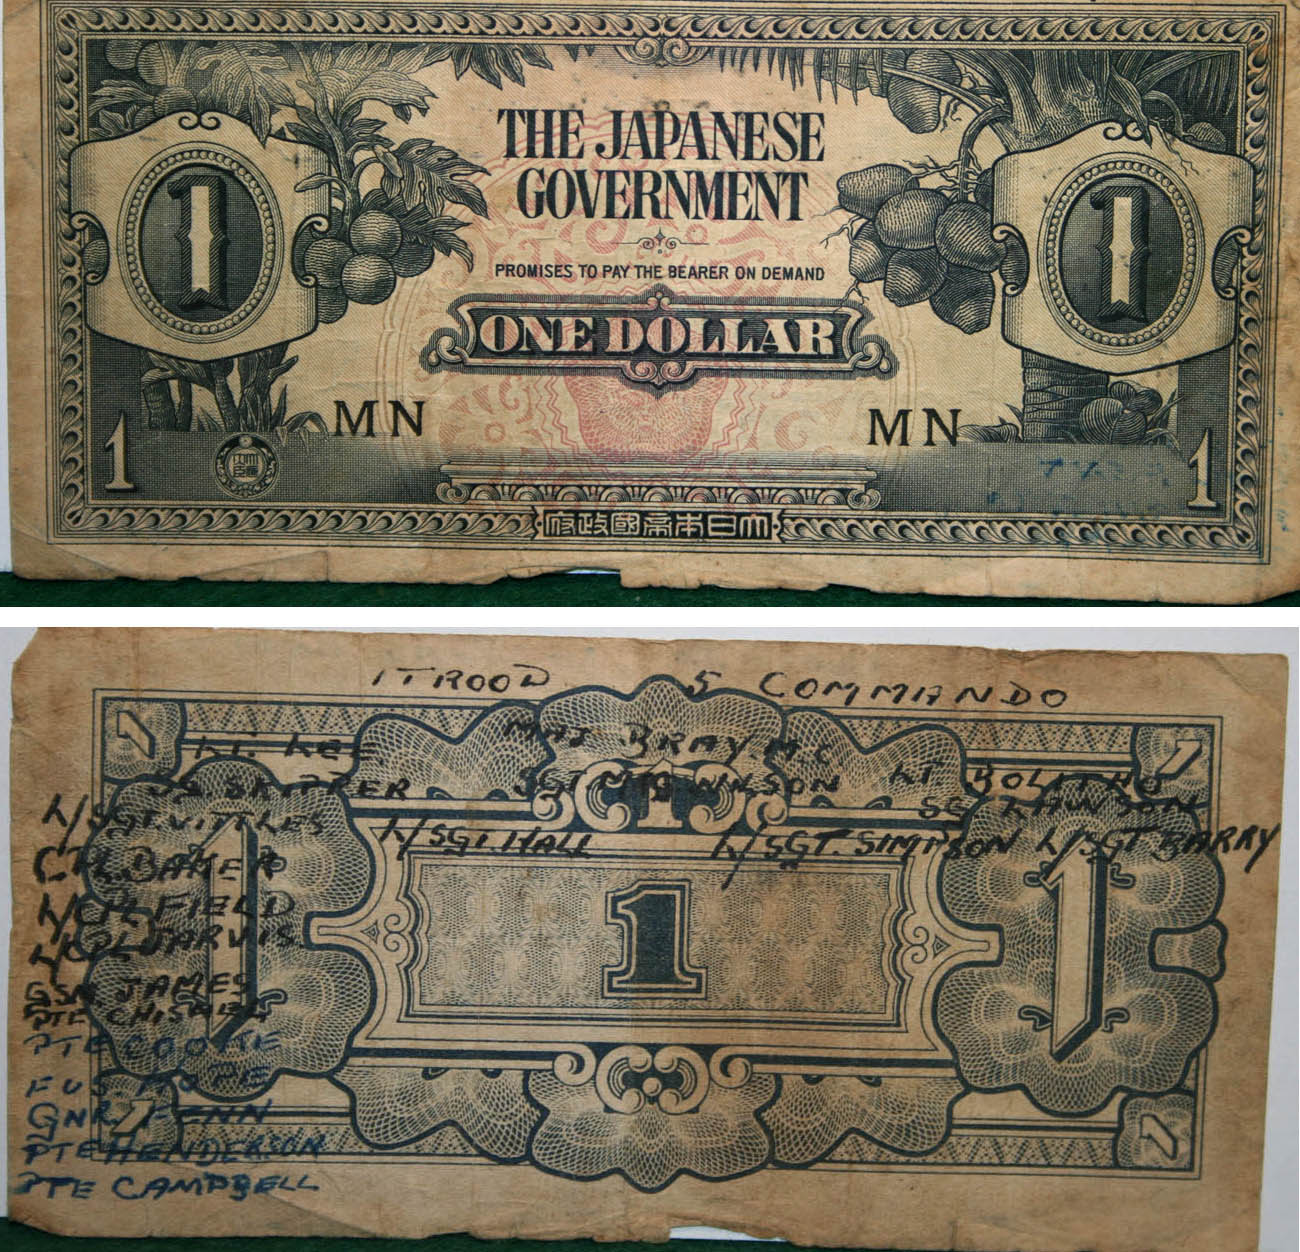 Japanese banknote signed by some of 1 troop of No.5 Commando